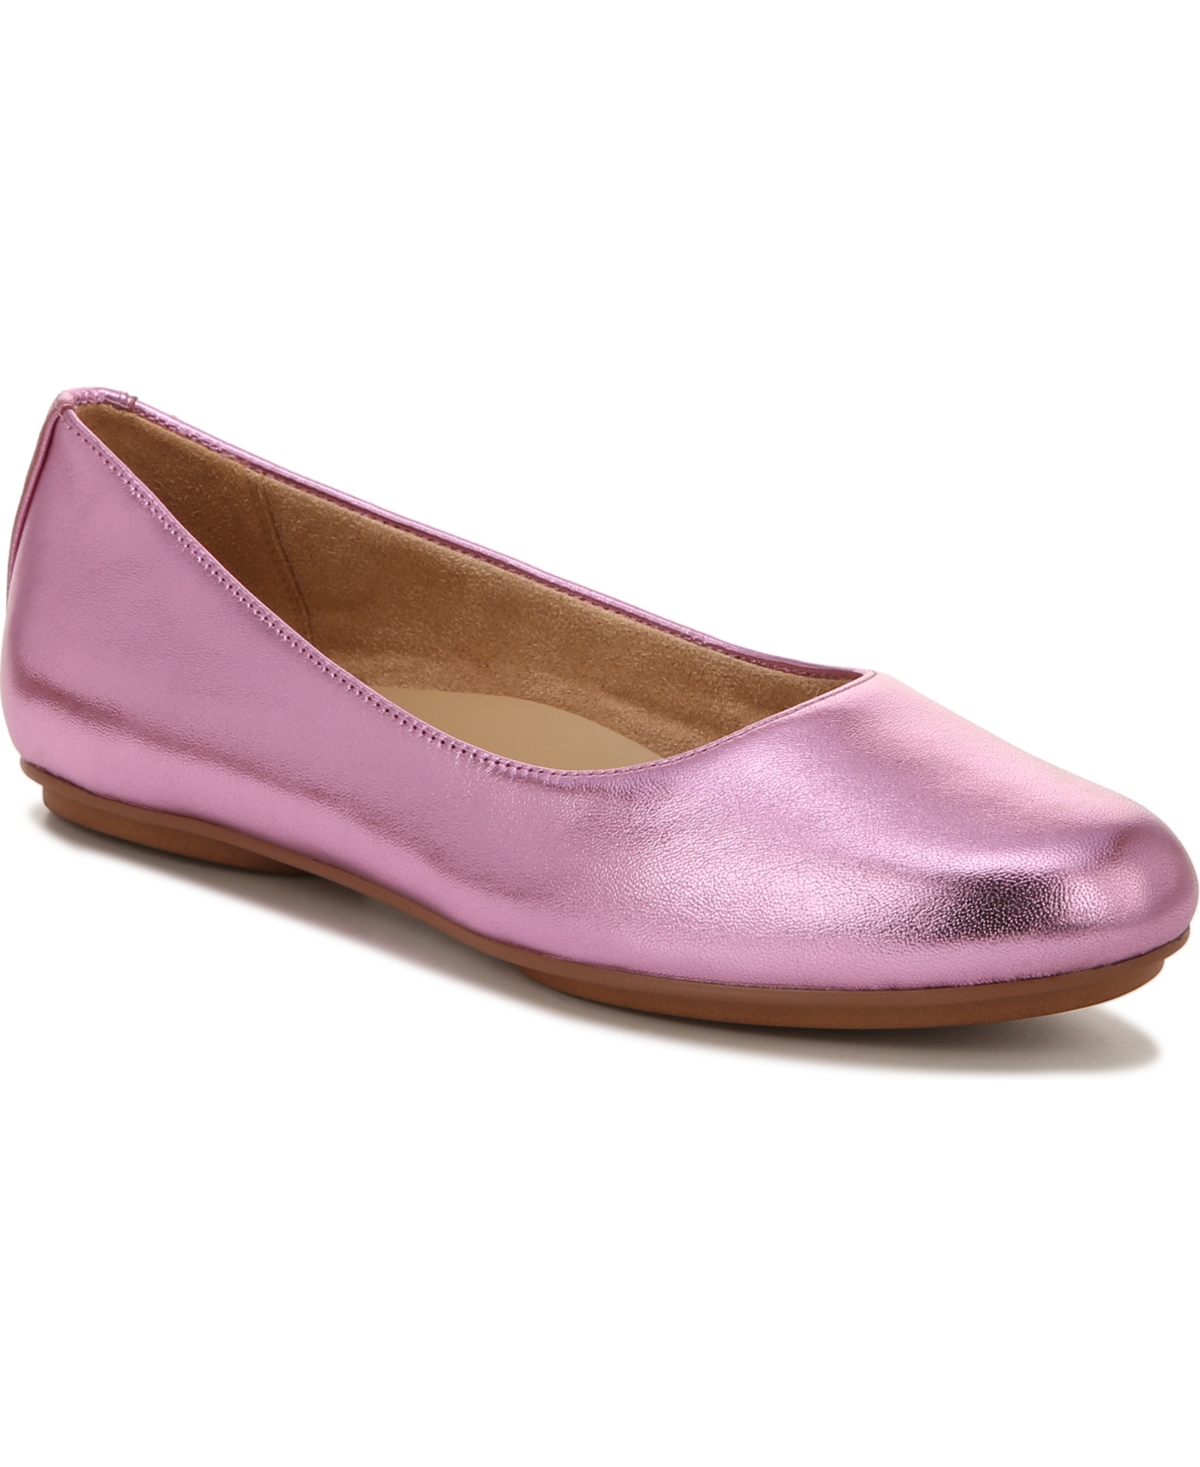 Naturalizer Maxwell Flats Women's Shoes In Wild Rose Metallic Leather ...